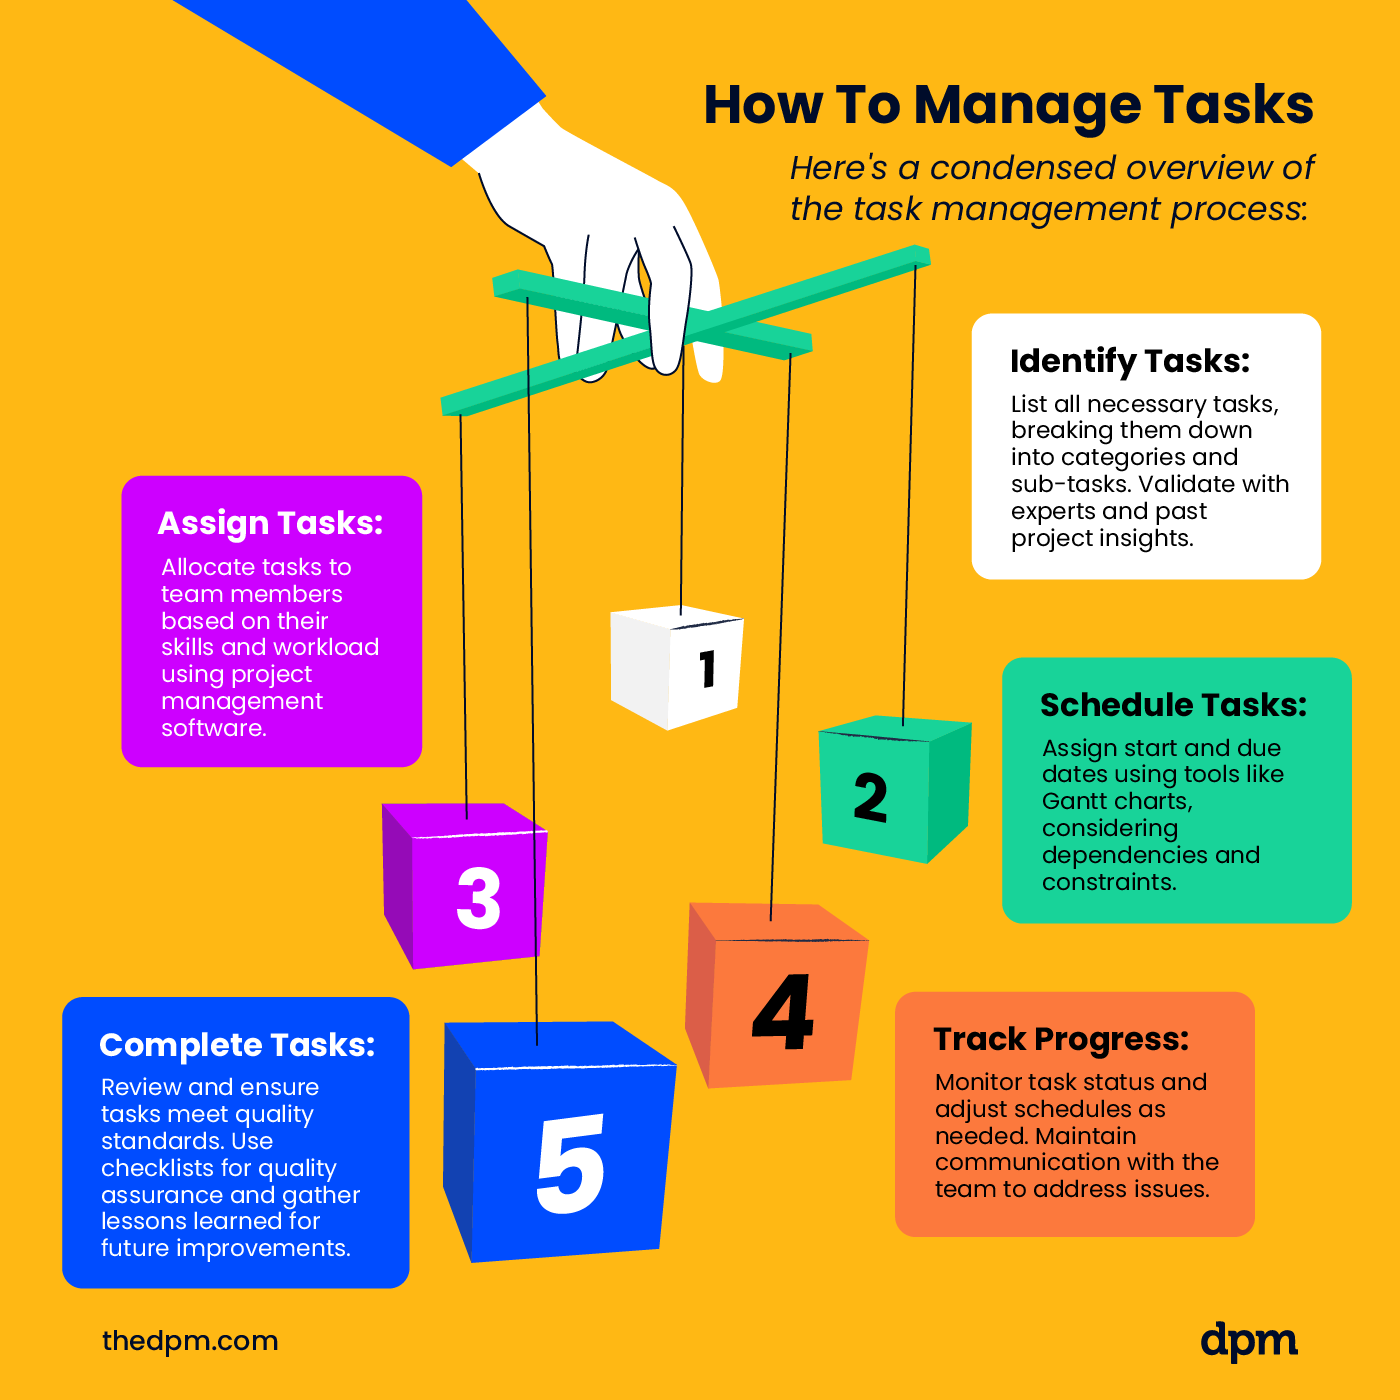 the five steps in the process of managing tasks